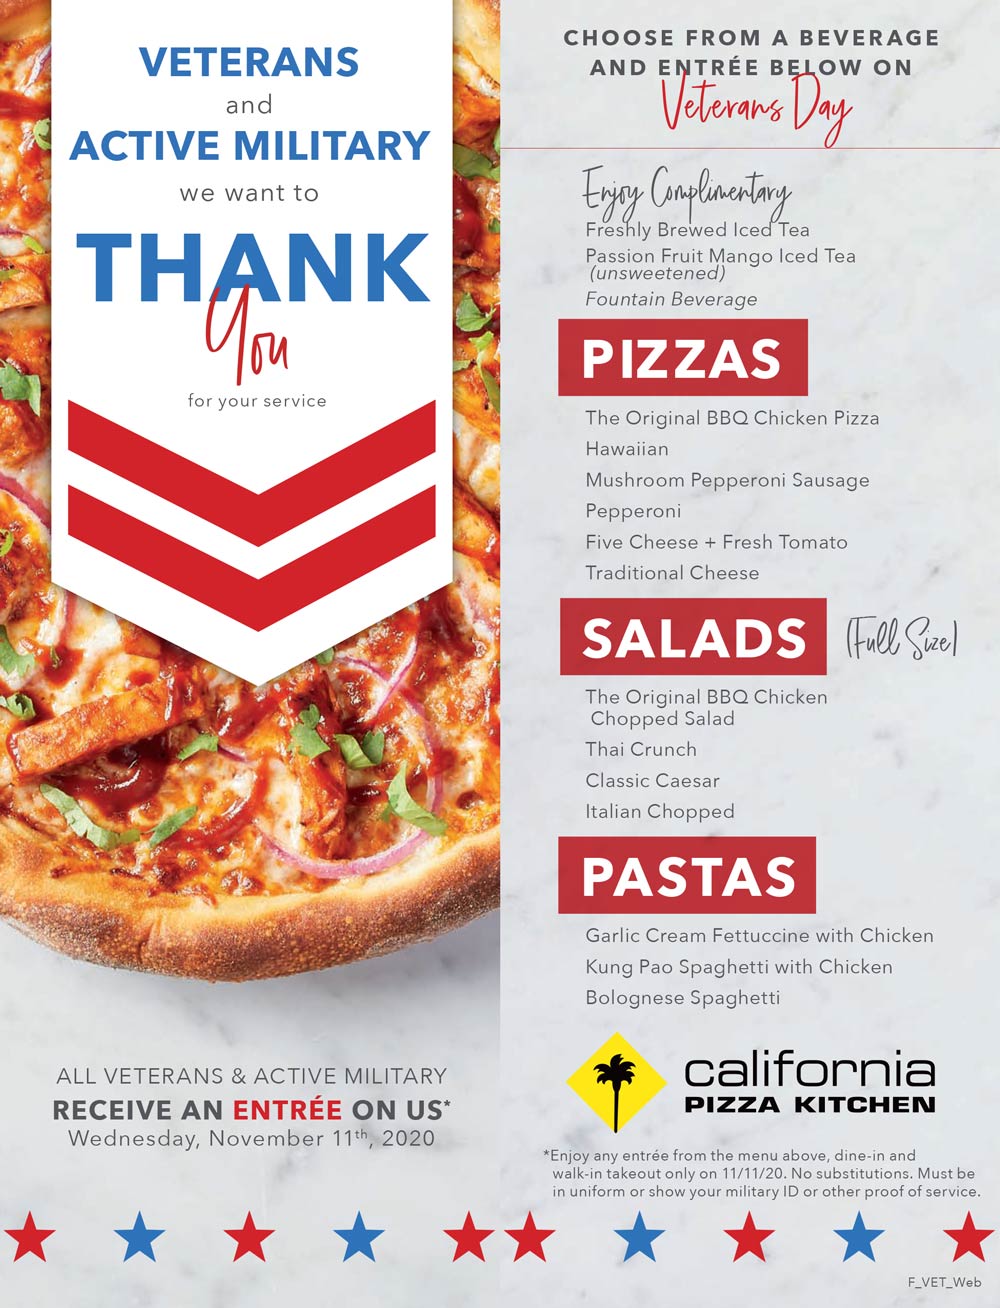 Free meal for veterans and military today at CPK California Pizza